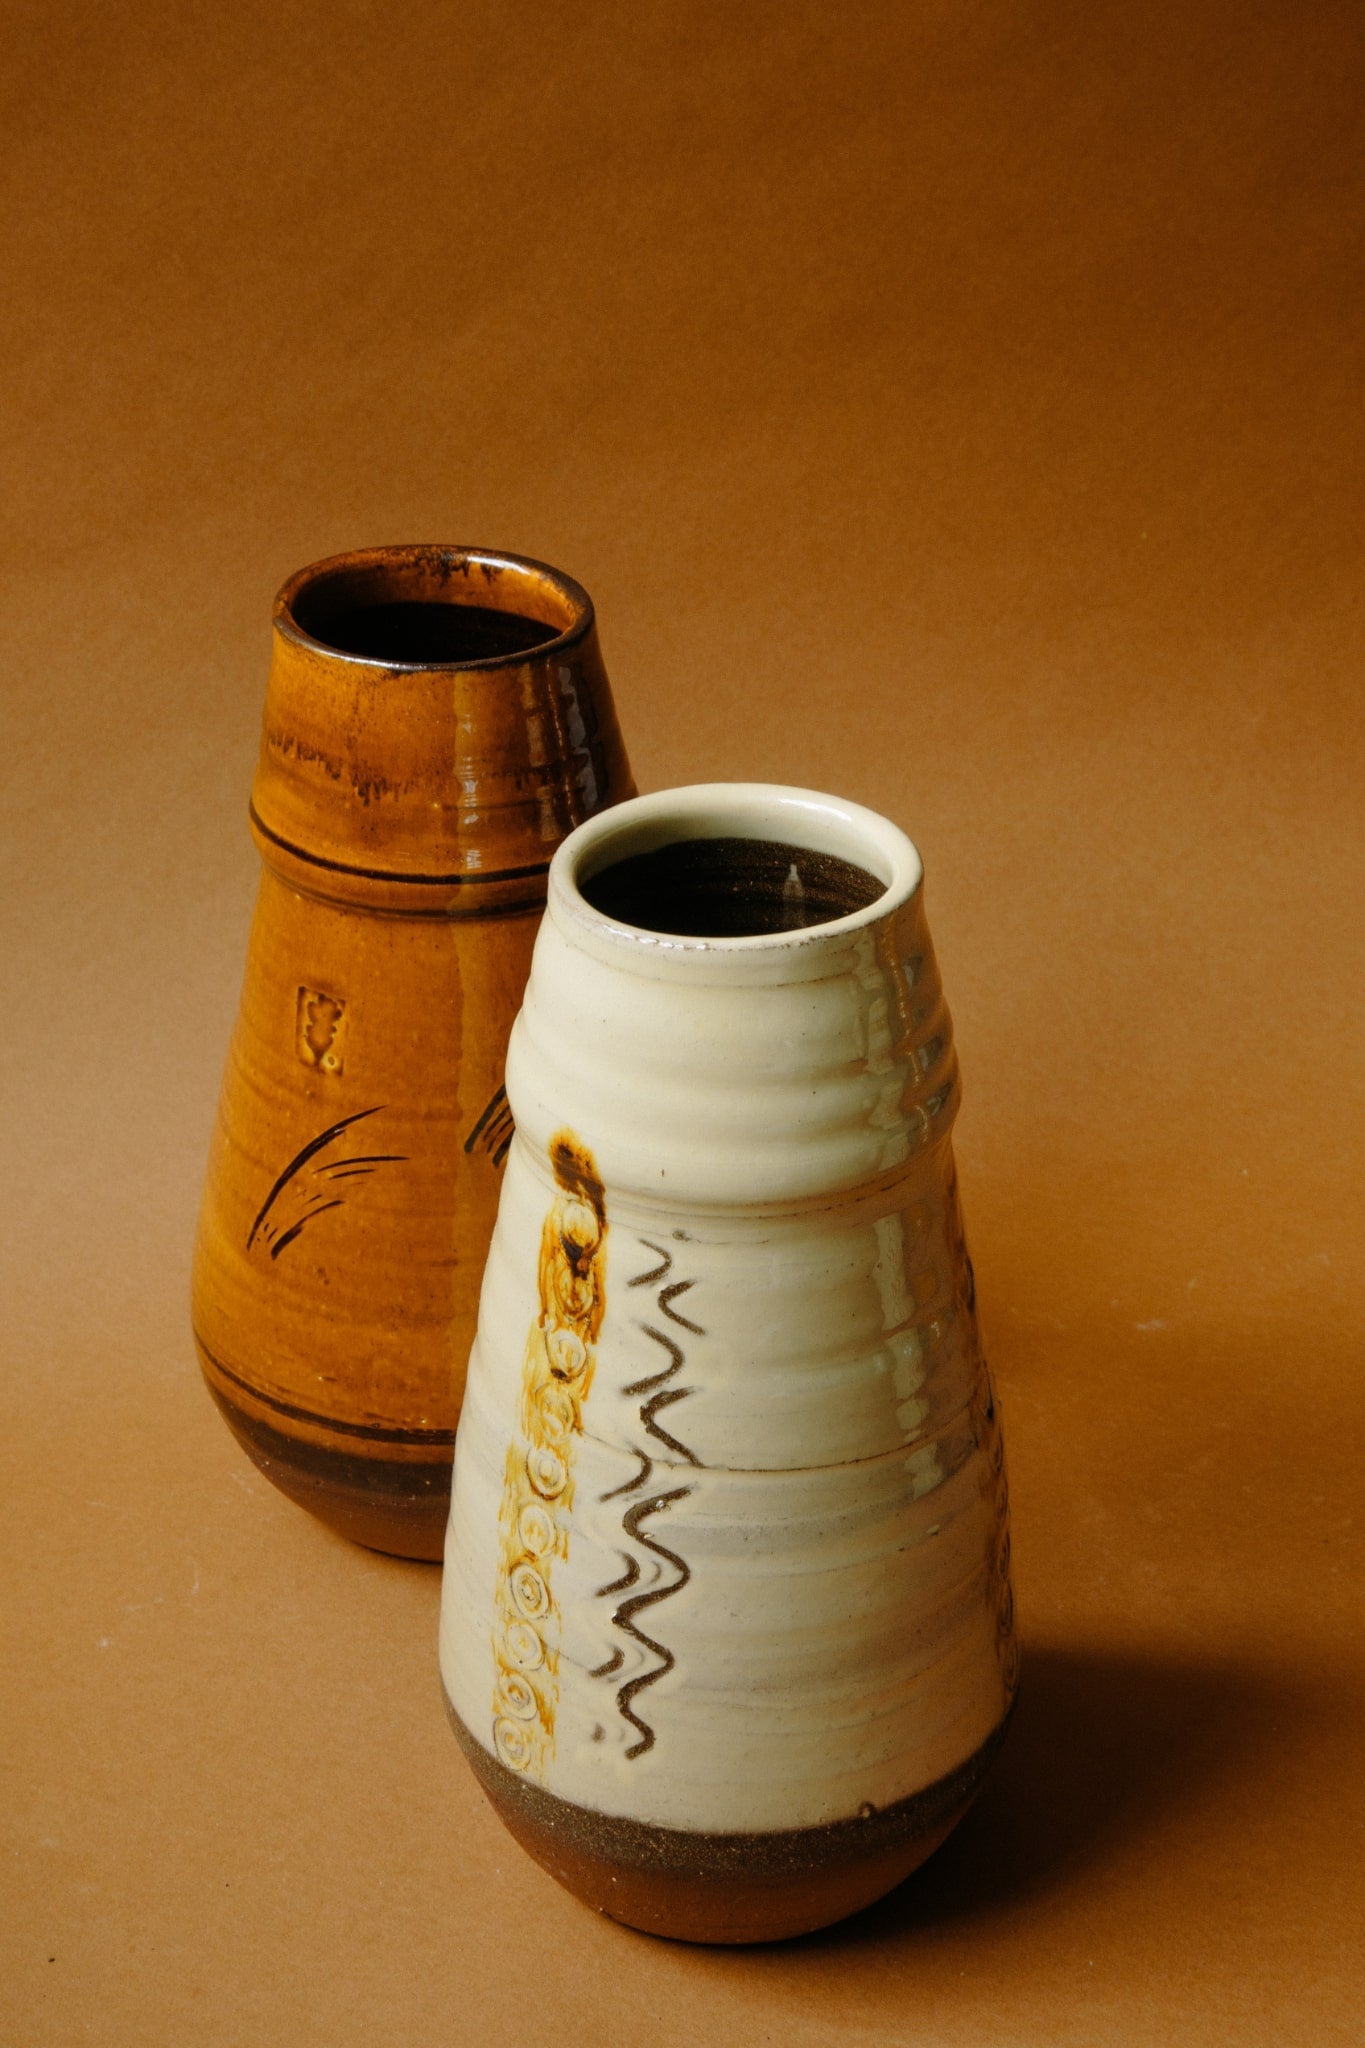 ALT=Large ceramic vases in caramel and white with unique markings. Shot empty on a brown backdrop.